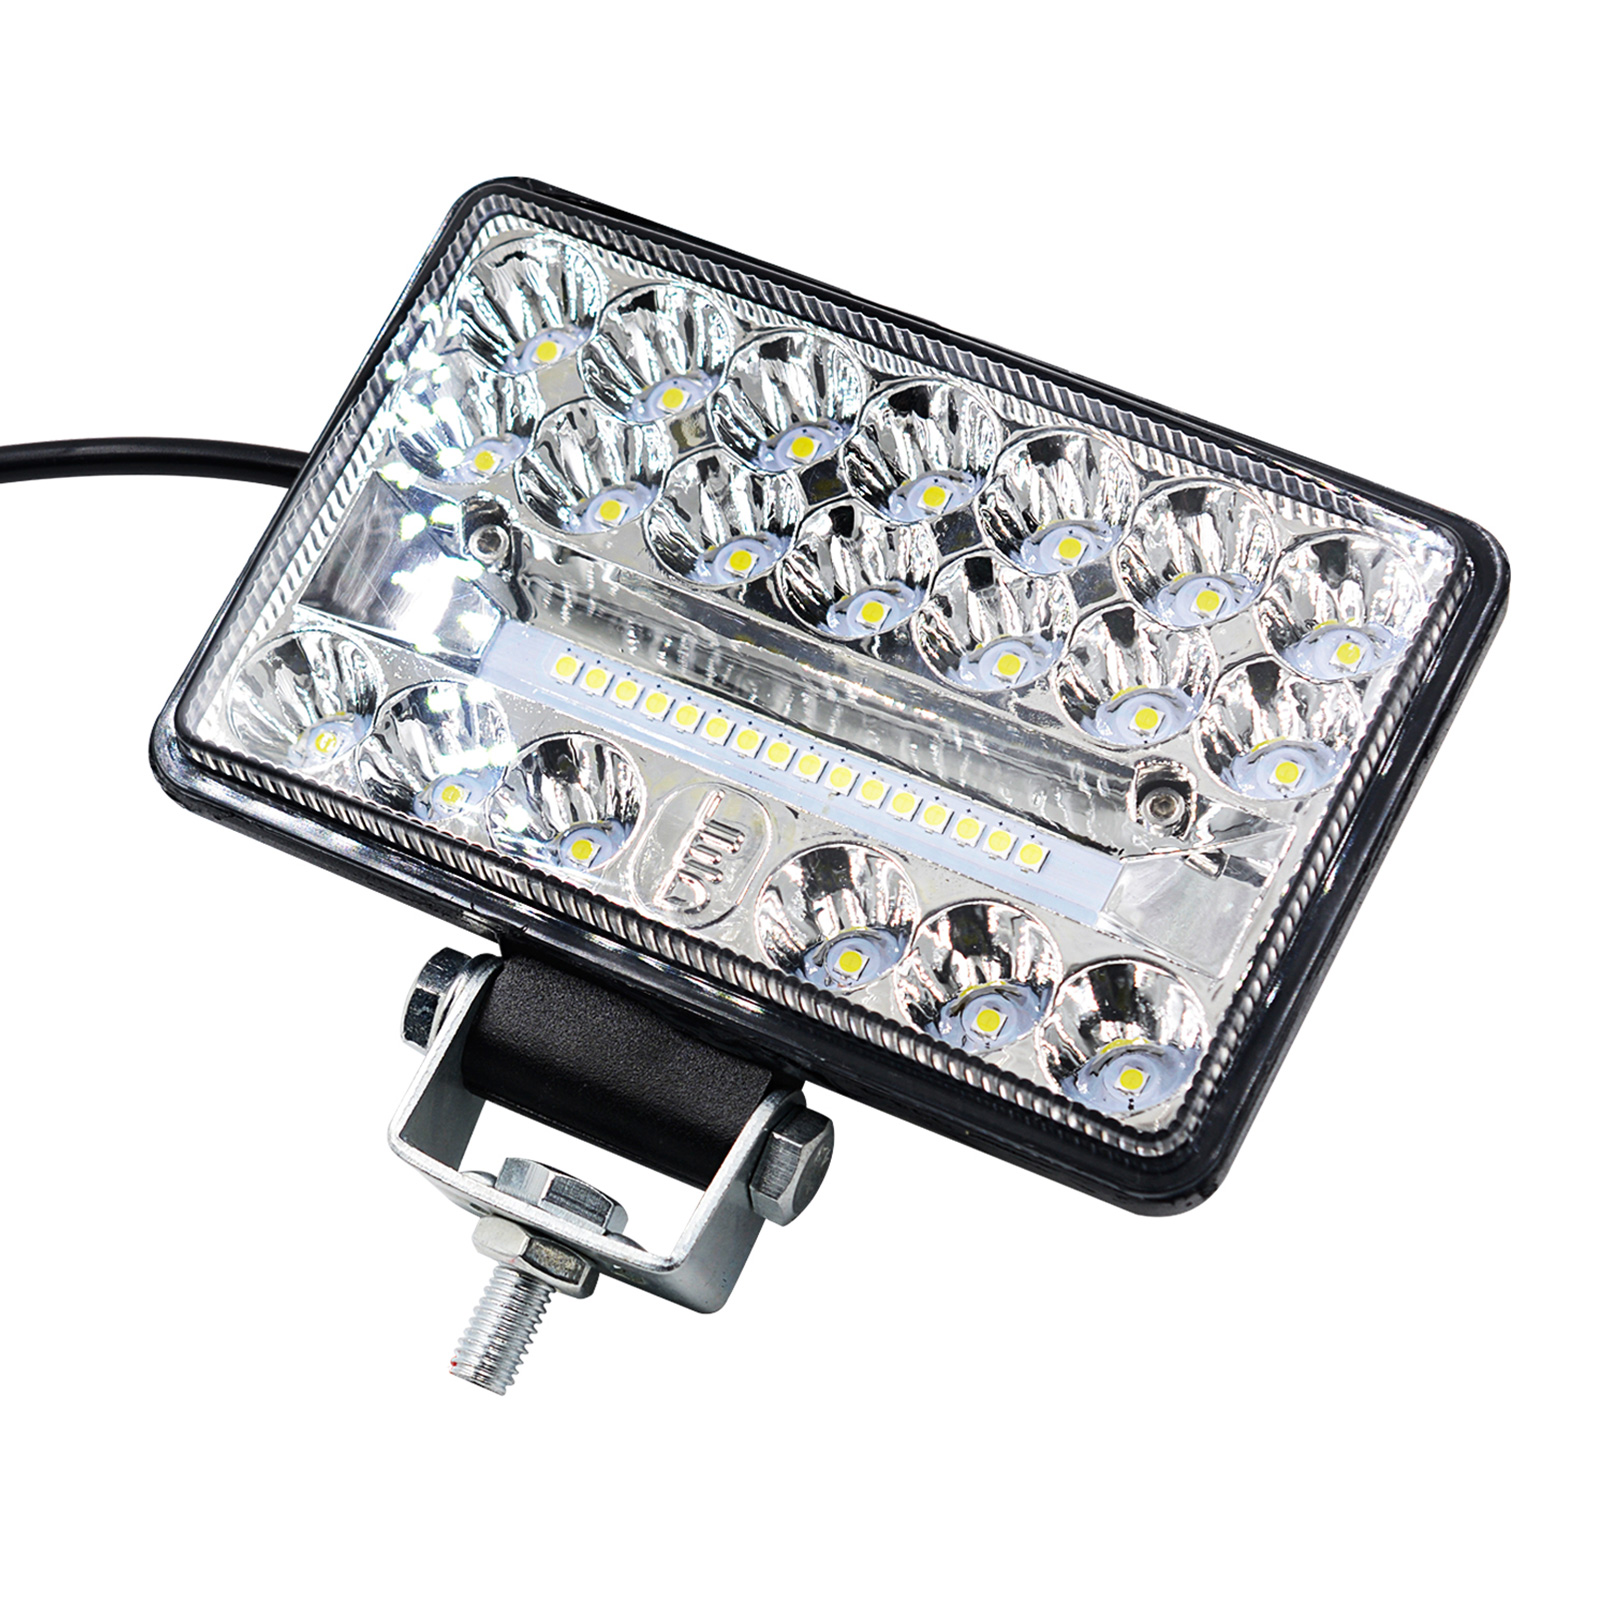 60W Four-Inch Square Dual Headlight LED Work Light for DC12-80V Motorcycles Cars Atvs Off-Road and Vehicles - Auto GoShop